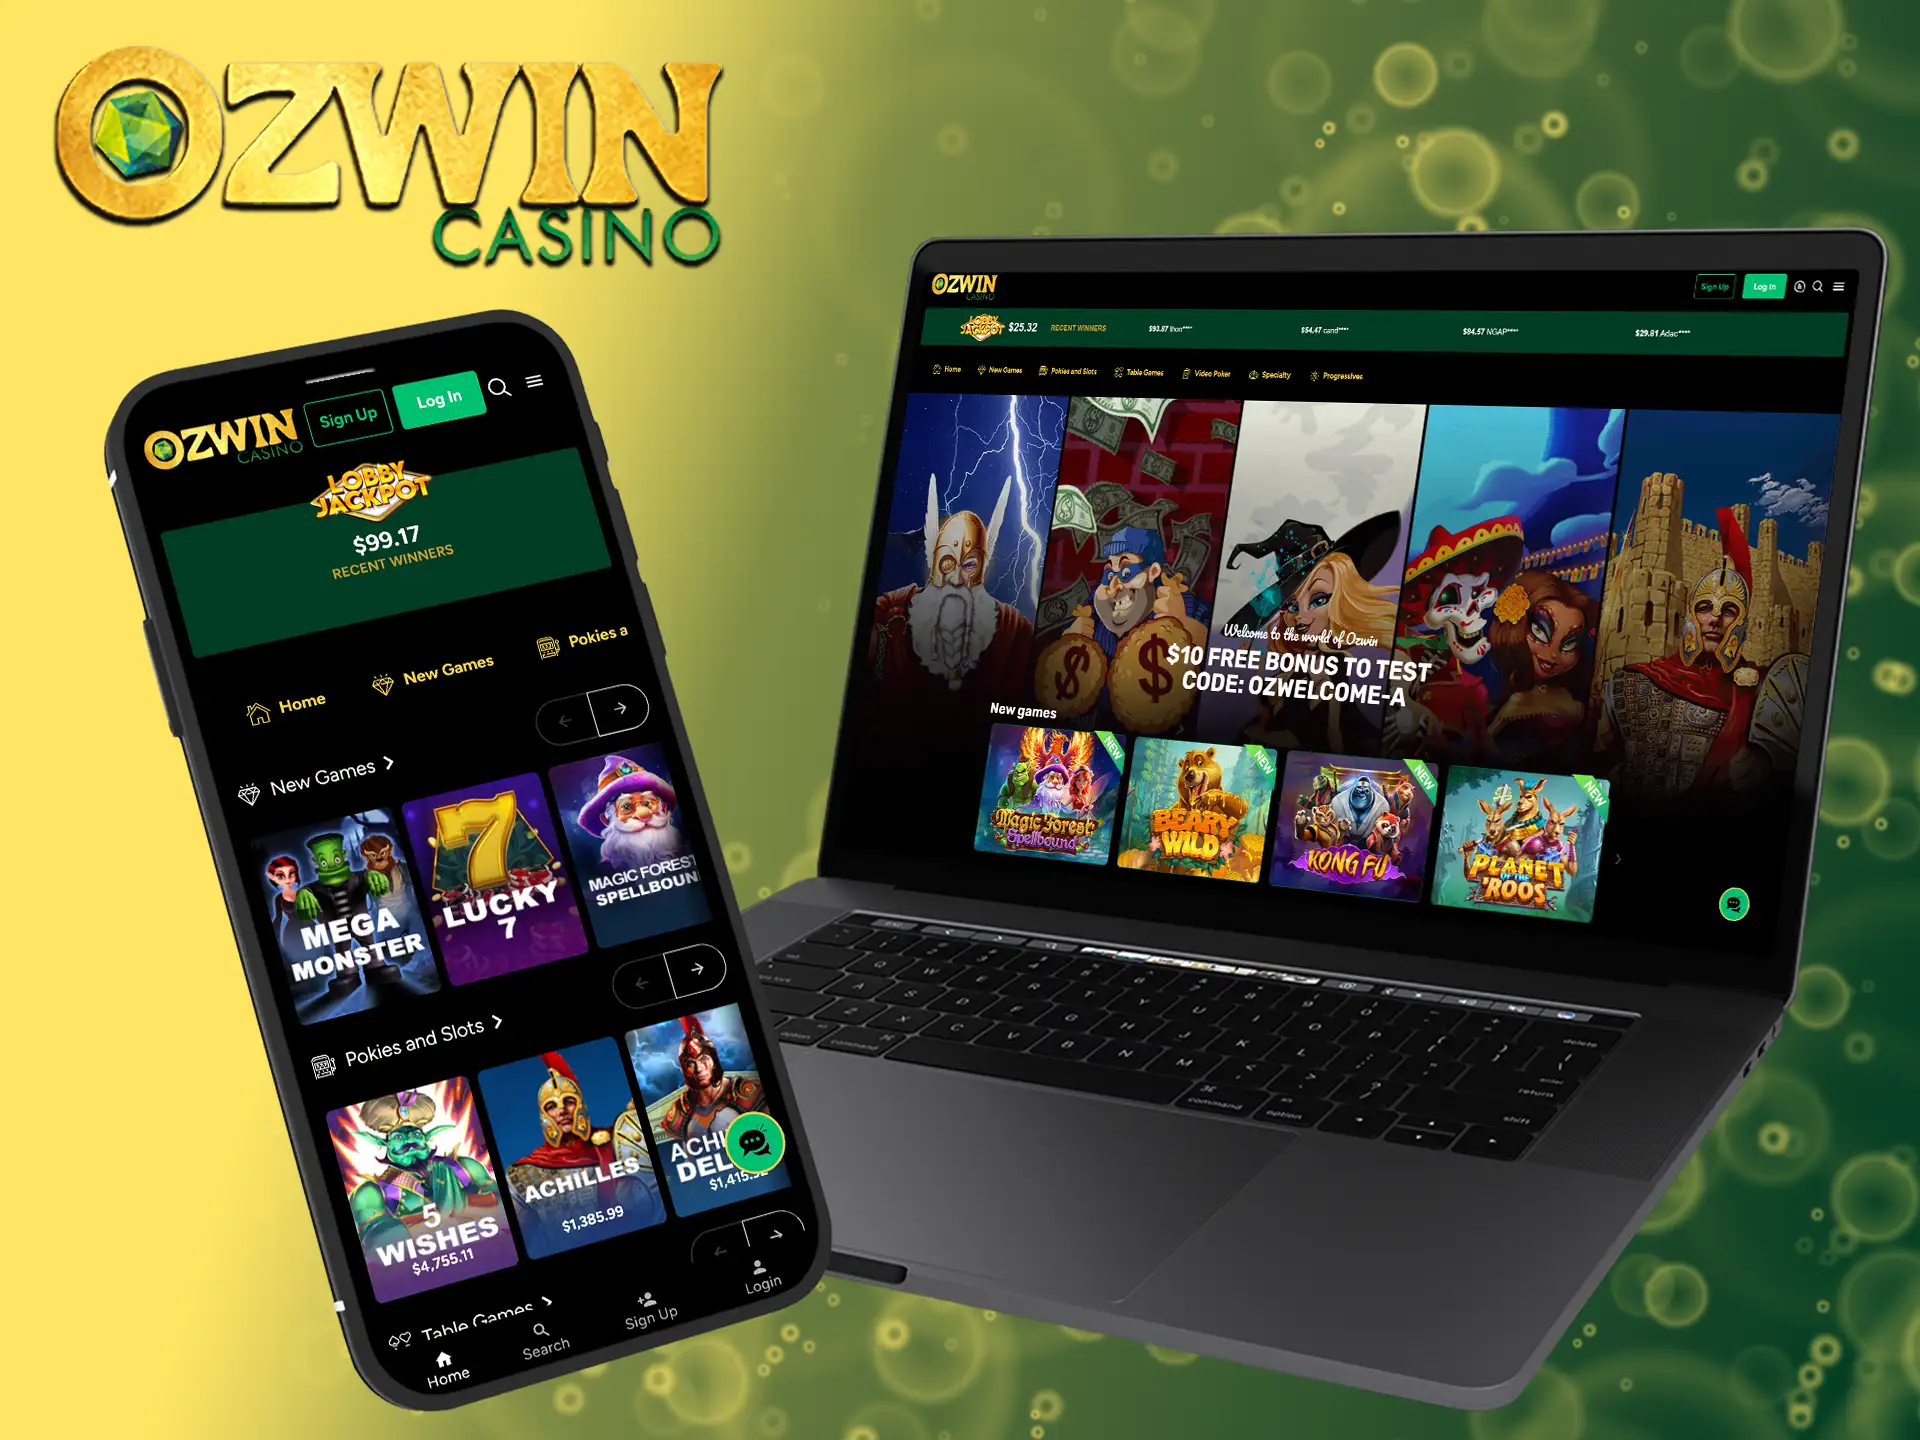 Ozwin Casino intuitive website and app keep the fun front and center with interactive designs and a massive game library.